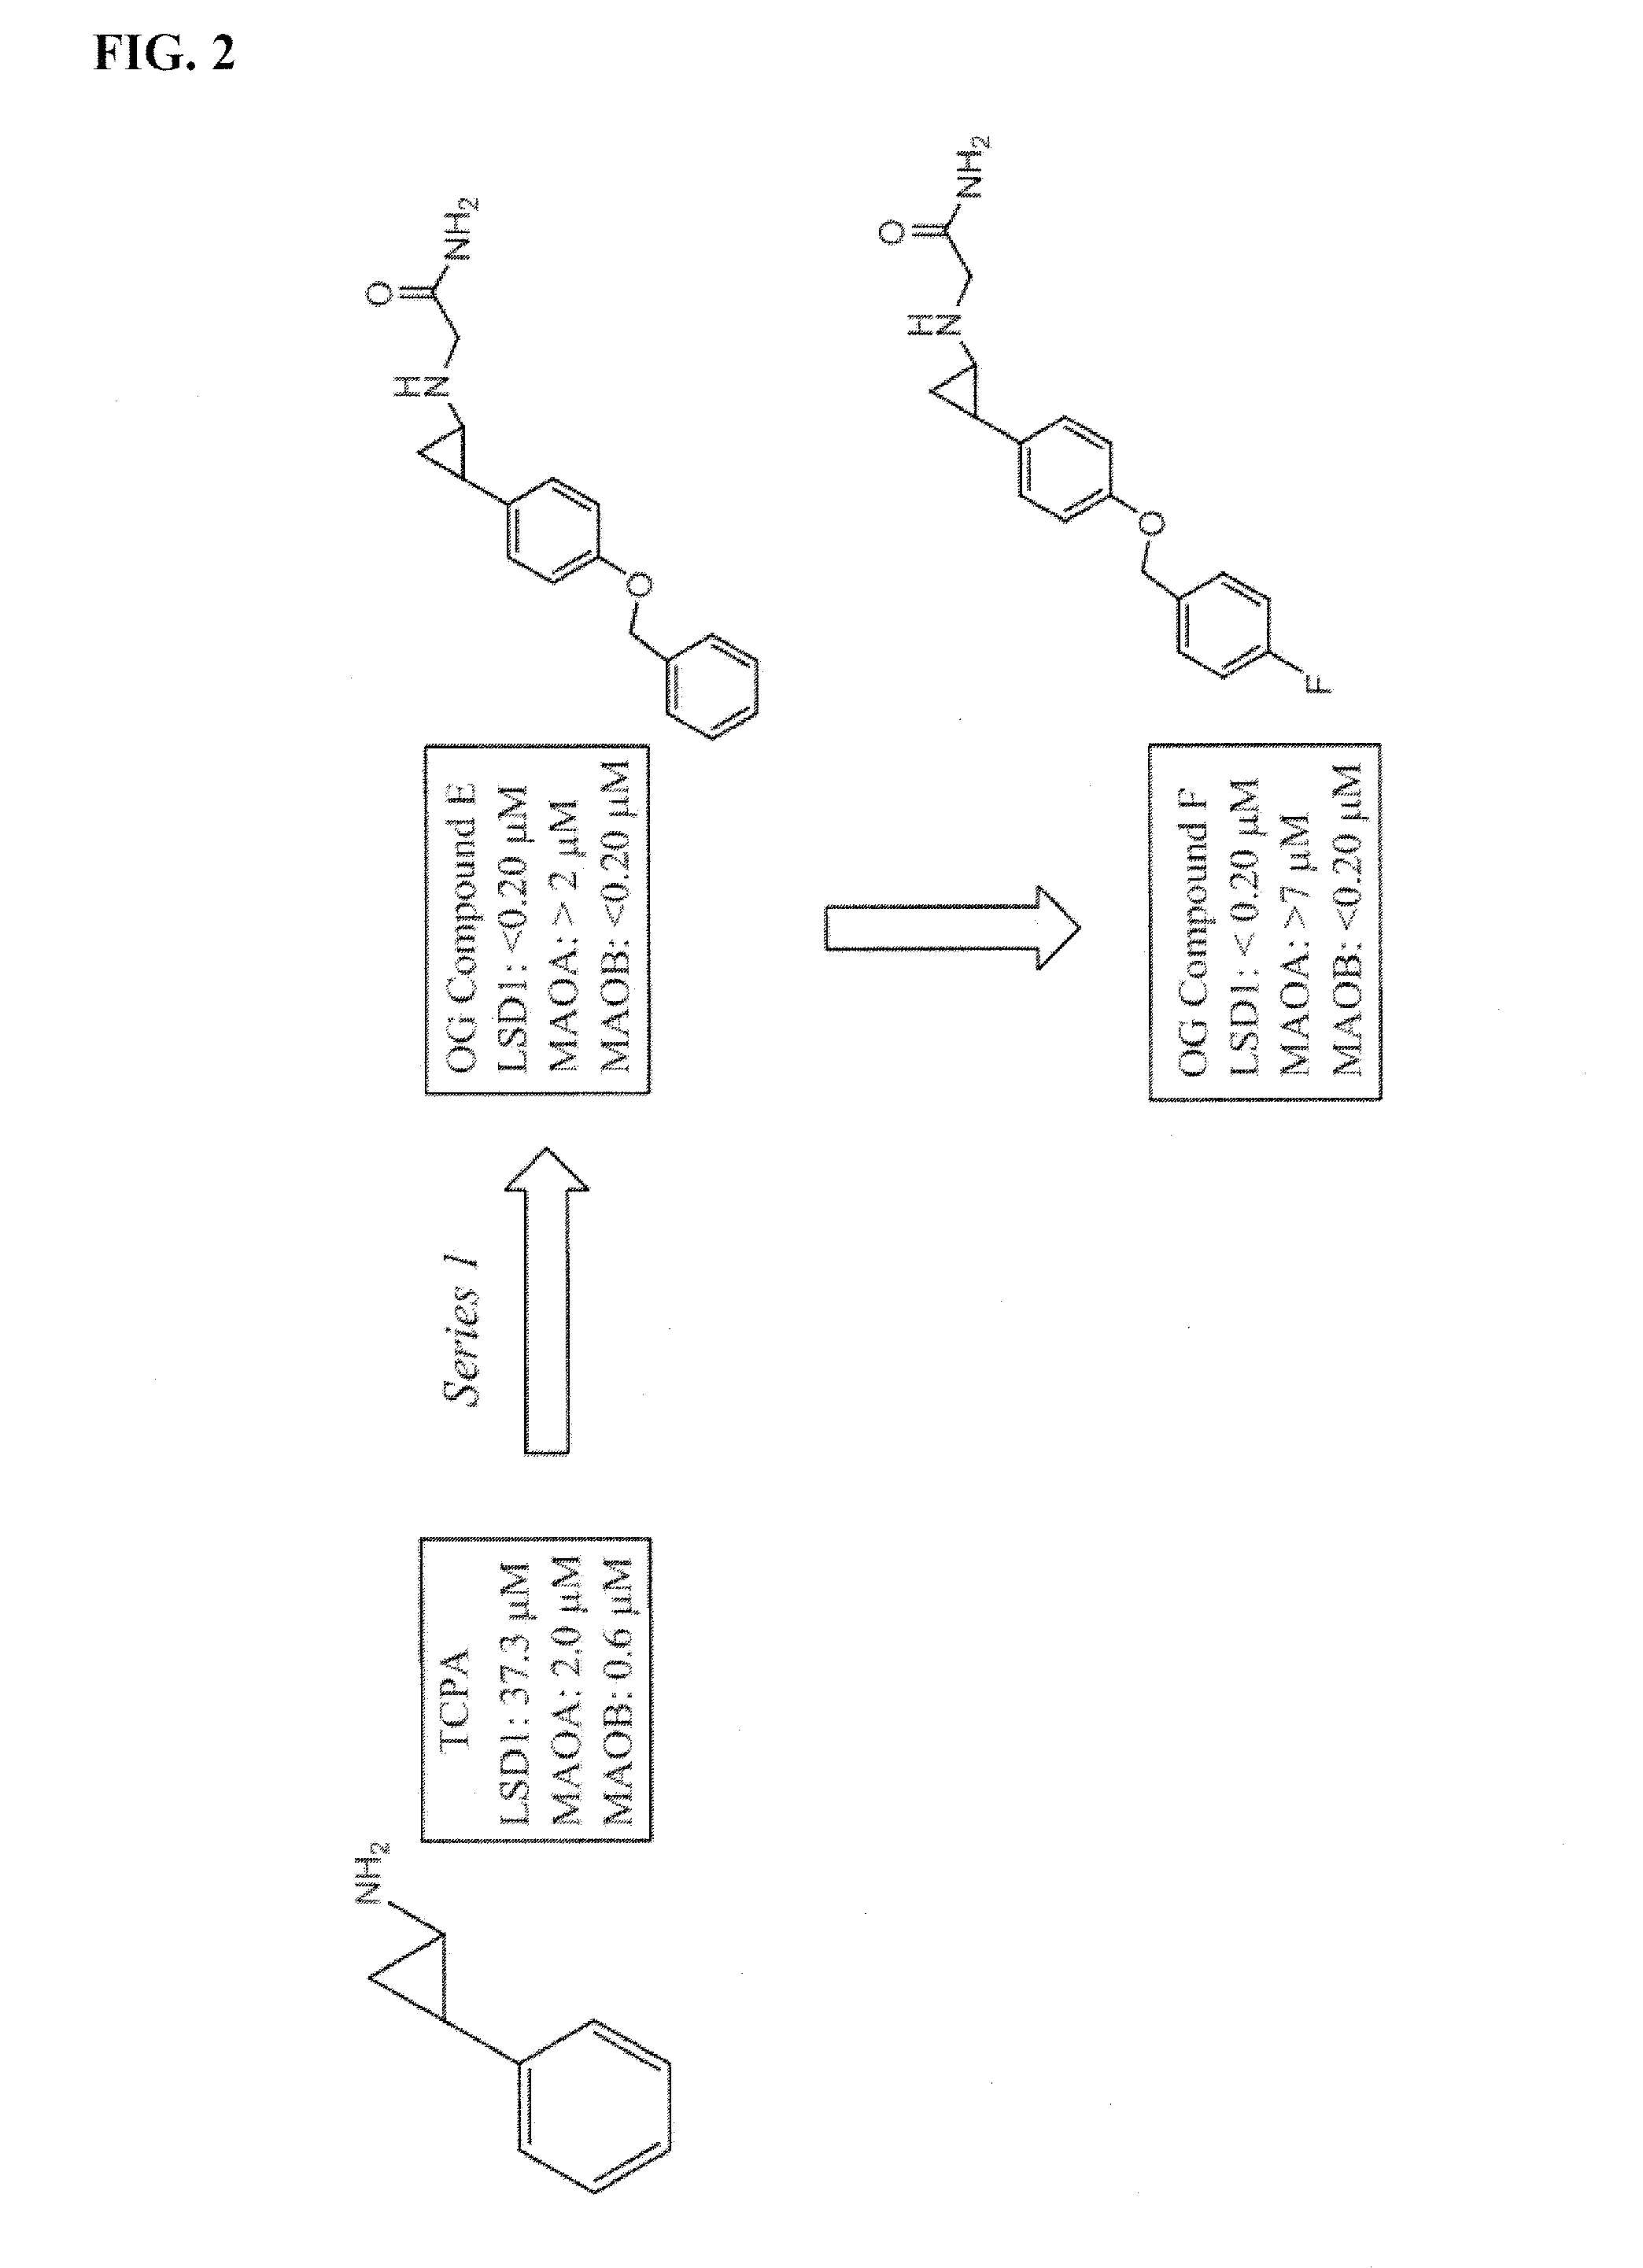 Lysine demethylase inhibitors for inflammatory diseases or conditions